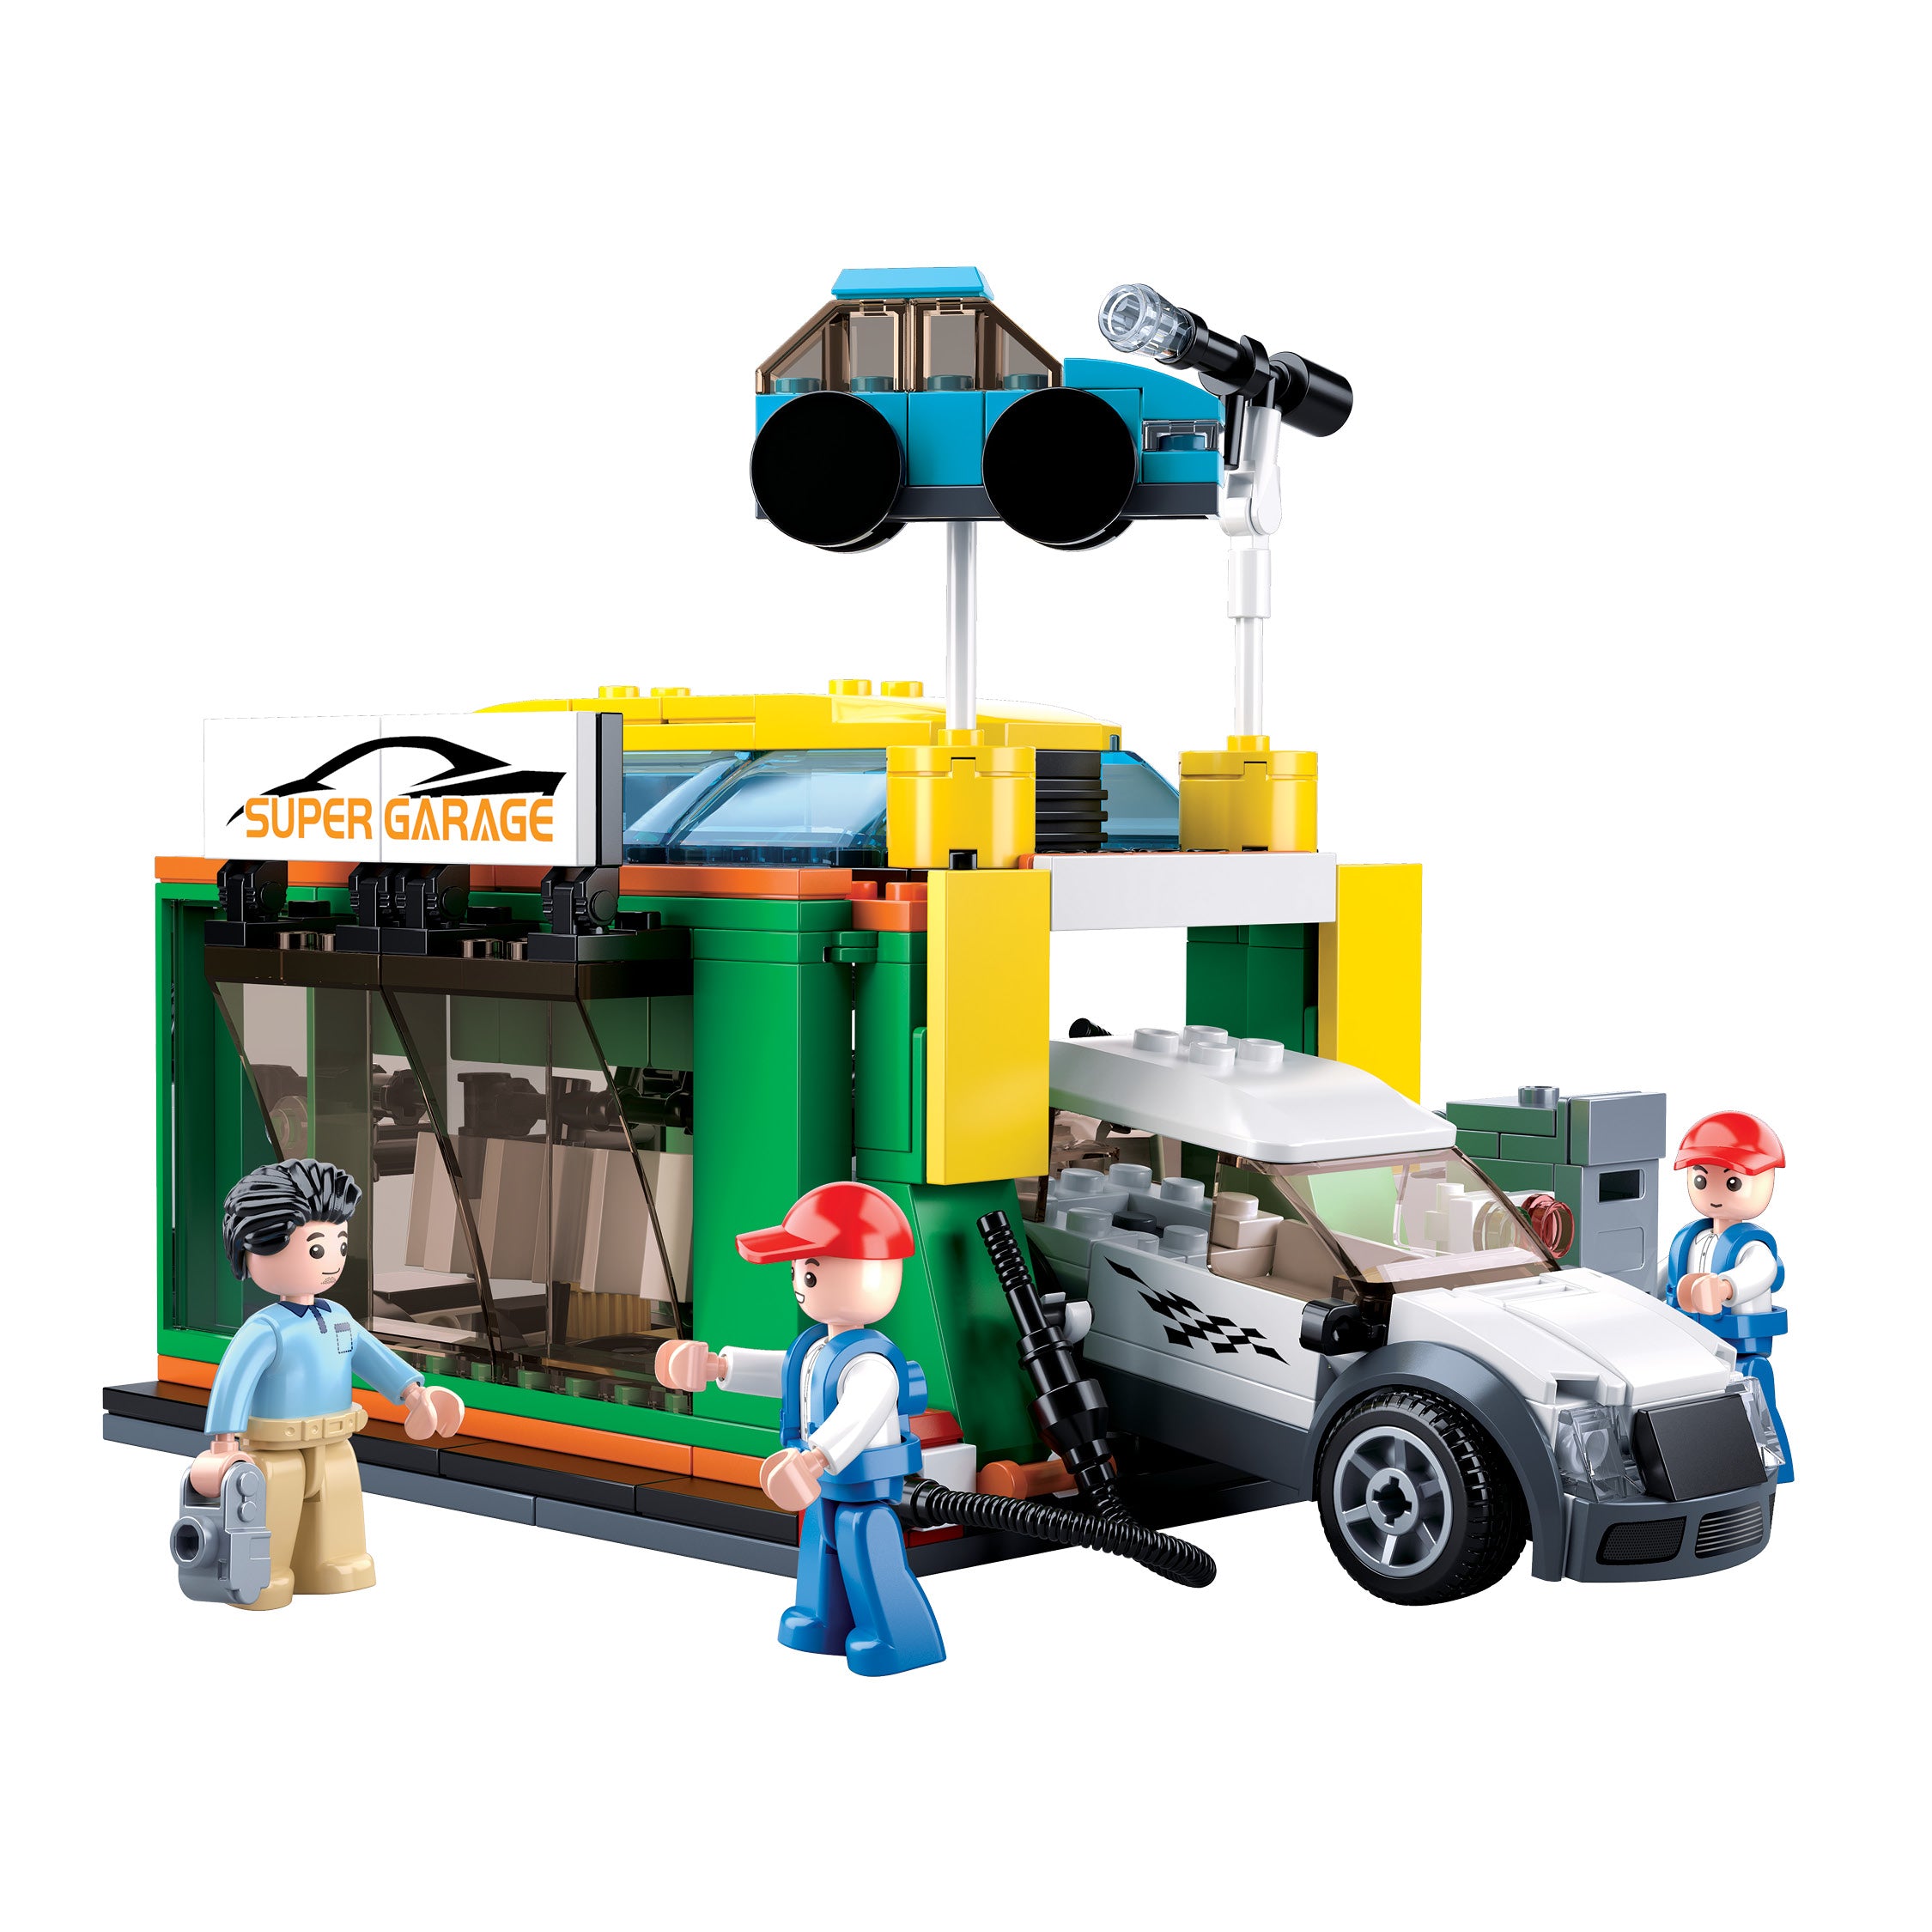 Sluban®  Car Wash (M38-B0759D) (323 Pieces) Building Blocks Kit For Boys Aged 6 Years And Above Creative Construction Set Educational Stem Toy, Ideal For Gifting Birthday Gift Return Gift, Blocks Compatible With Other Leading Brands, Bis Certified.